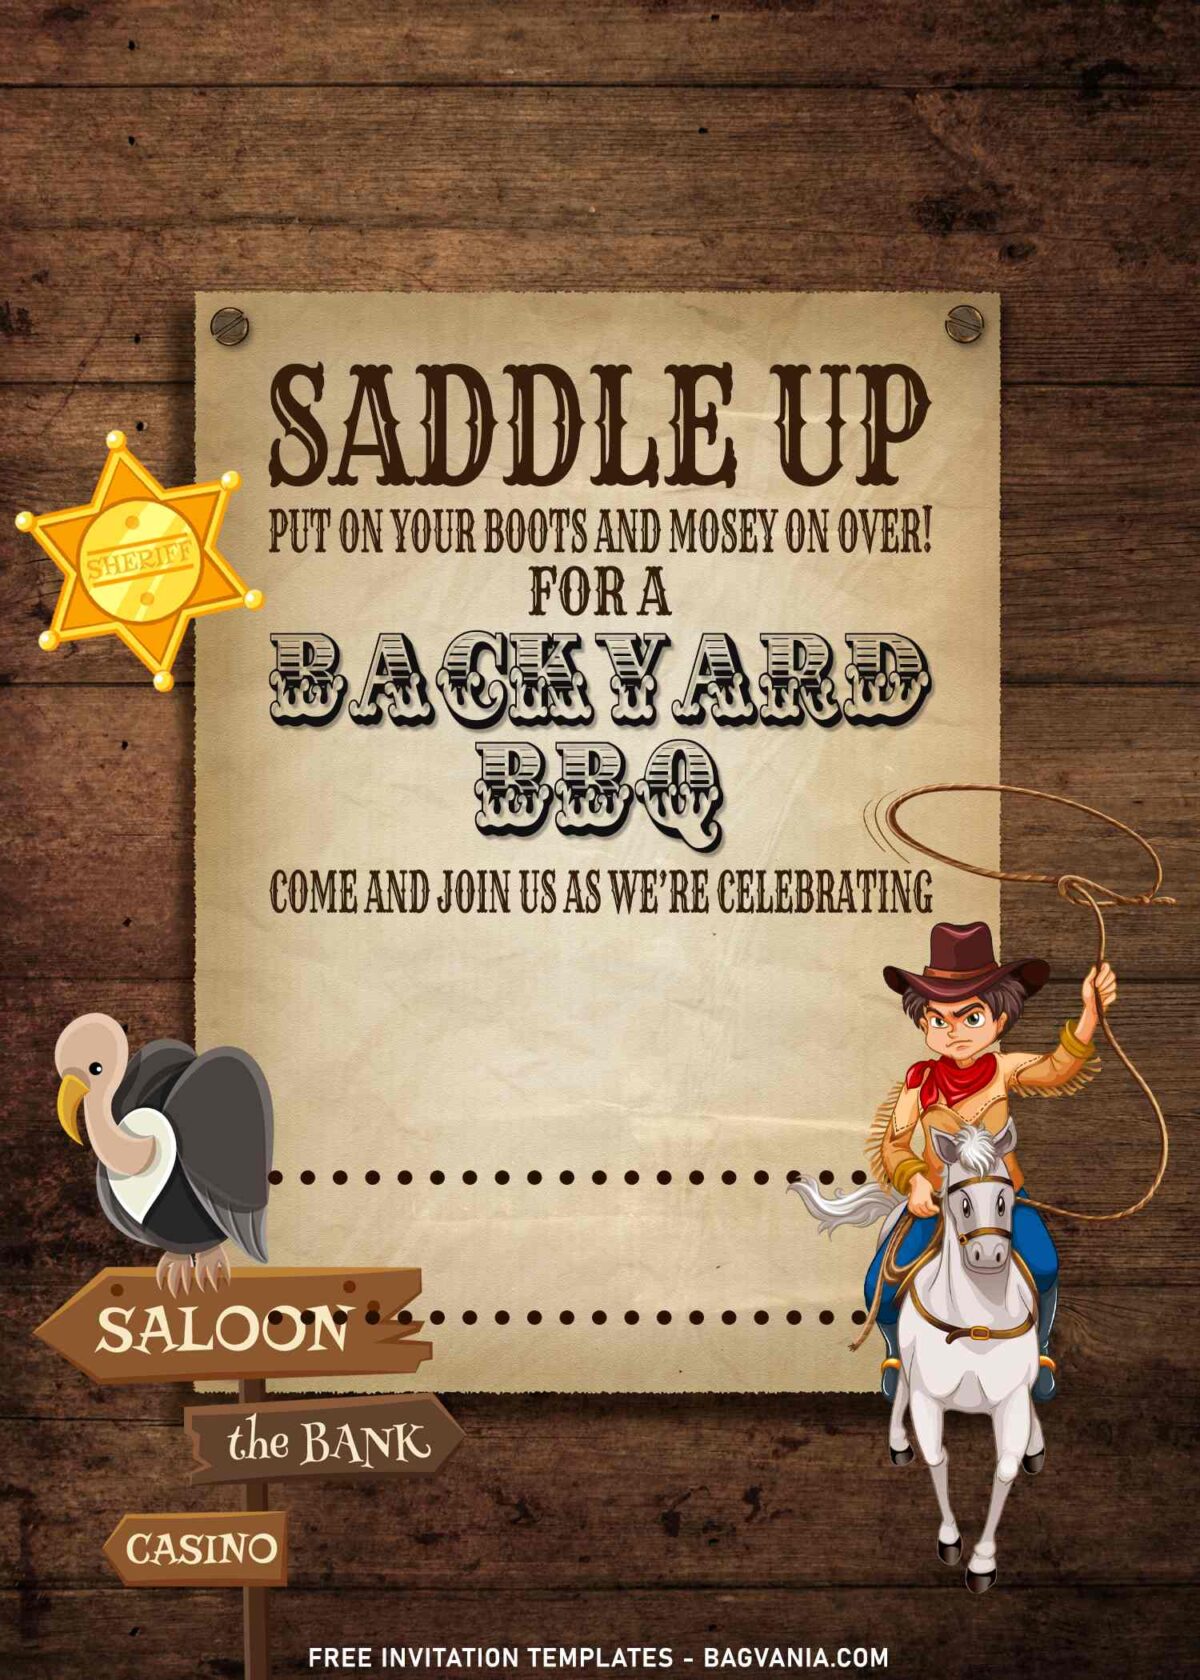 7+ Saddle Up Horse And Cowboy BBQ Birthday Invitation Templates with cowboy riding his horse and throwing lasso